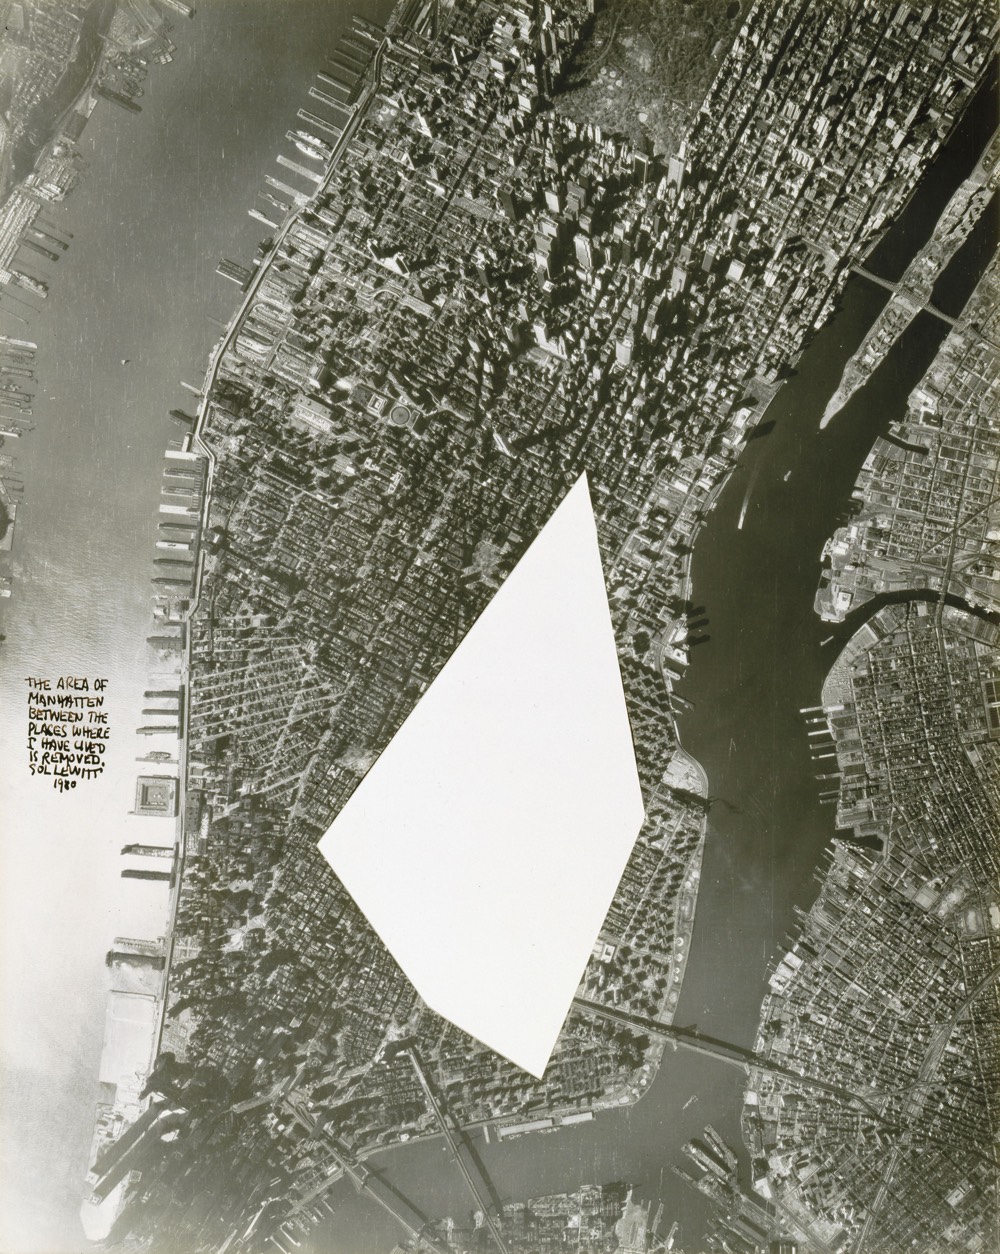 The Area of Manhattan Between the Places I Have Lived Is Removed by Sol LeWitt